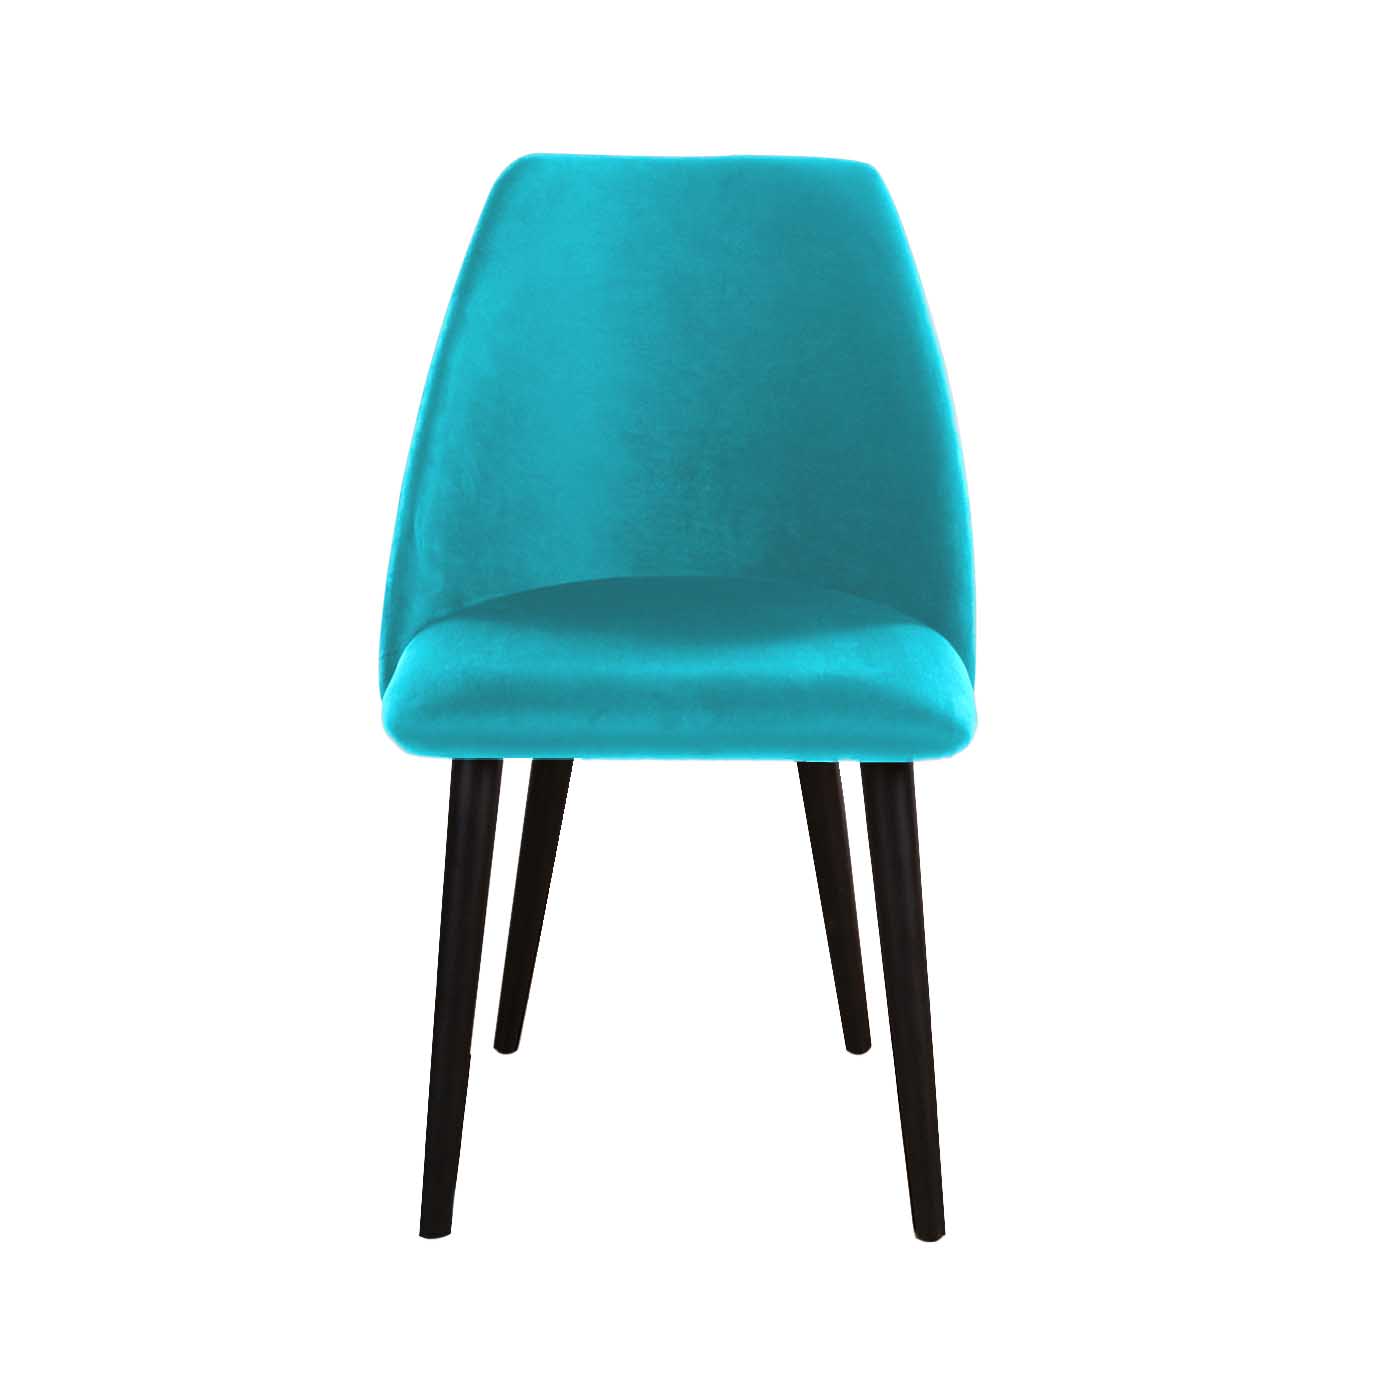 Elgin Turquoise Black Dining Chair